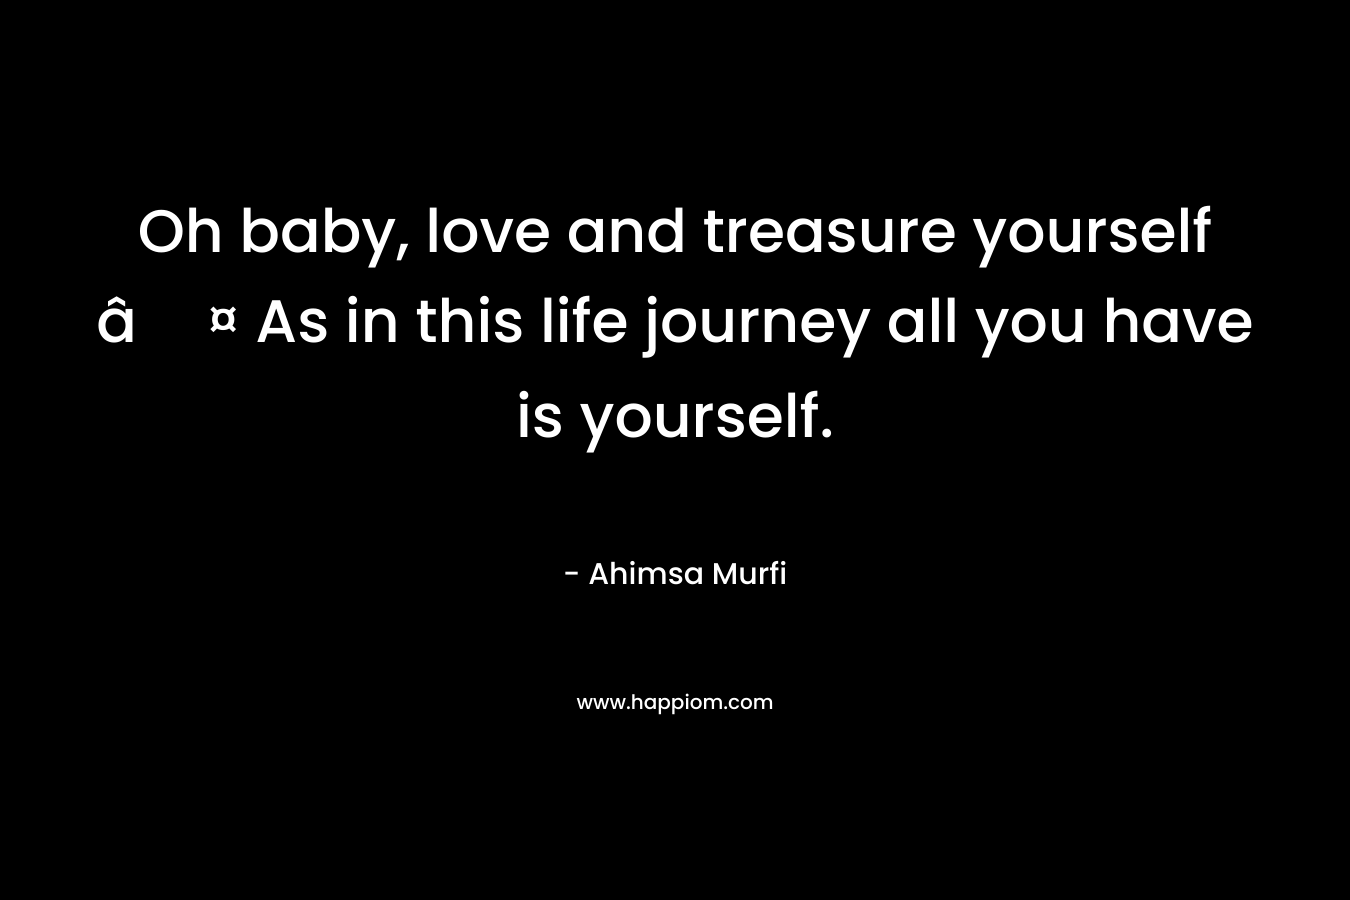 Oh baby, love and treasure yourself â¤ As in this life journey all you have is yourself.